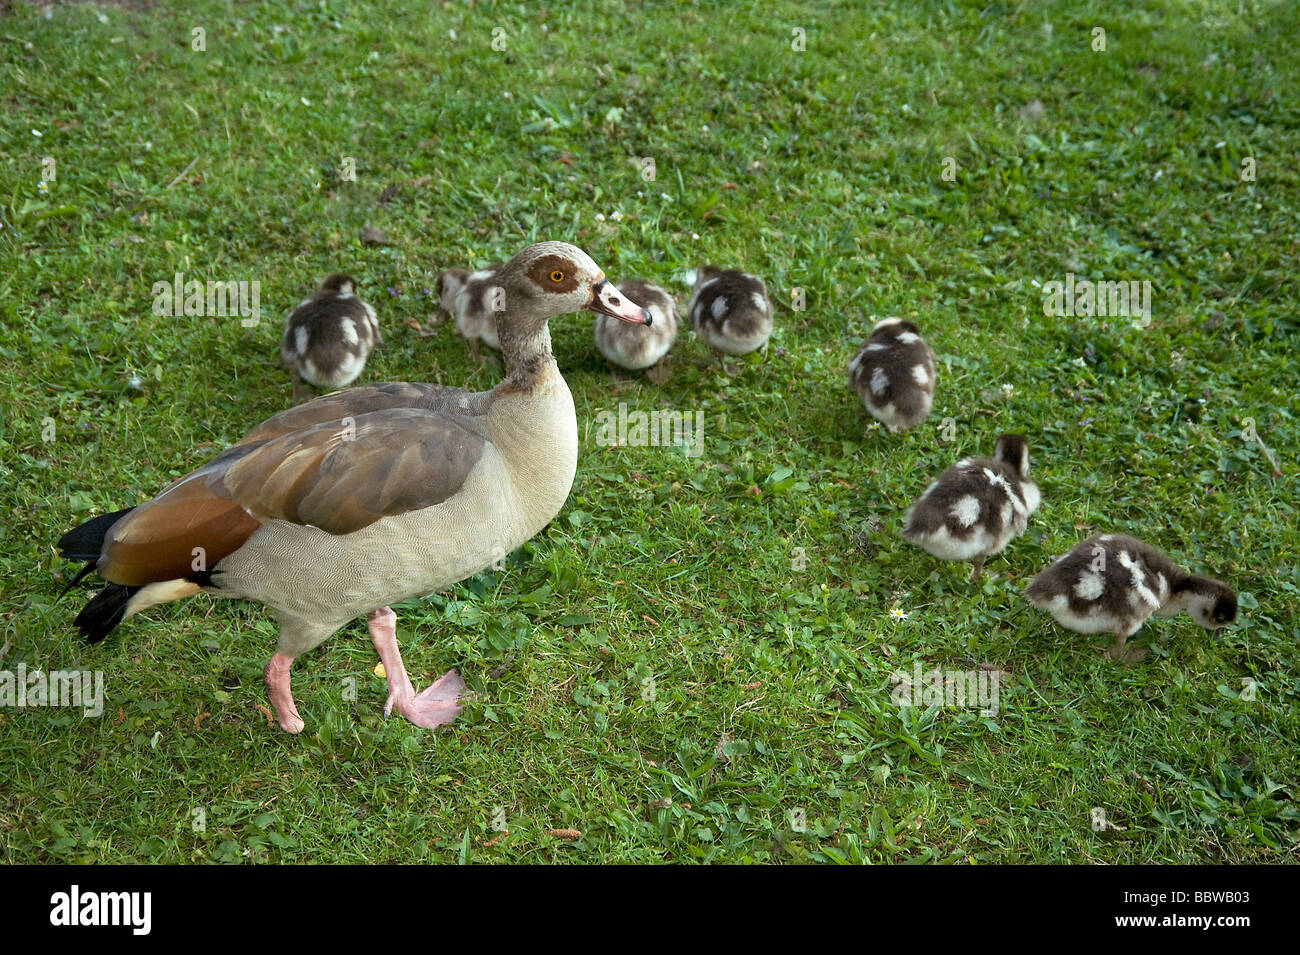 Egyptian goose Alopochen aegyptiacus lost foot defending 7 young goslings from predator probably a fox Stock Photo